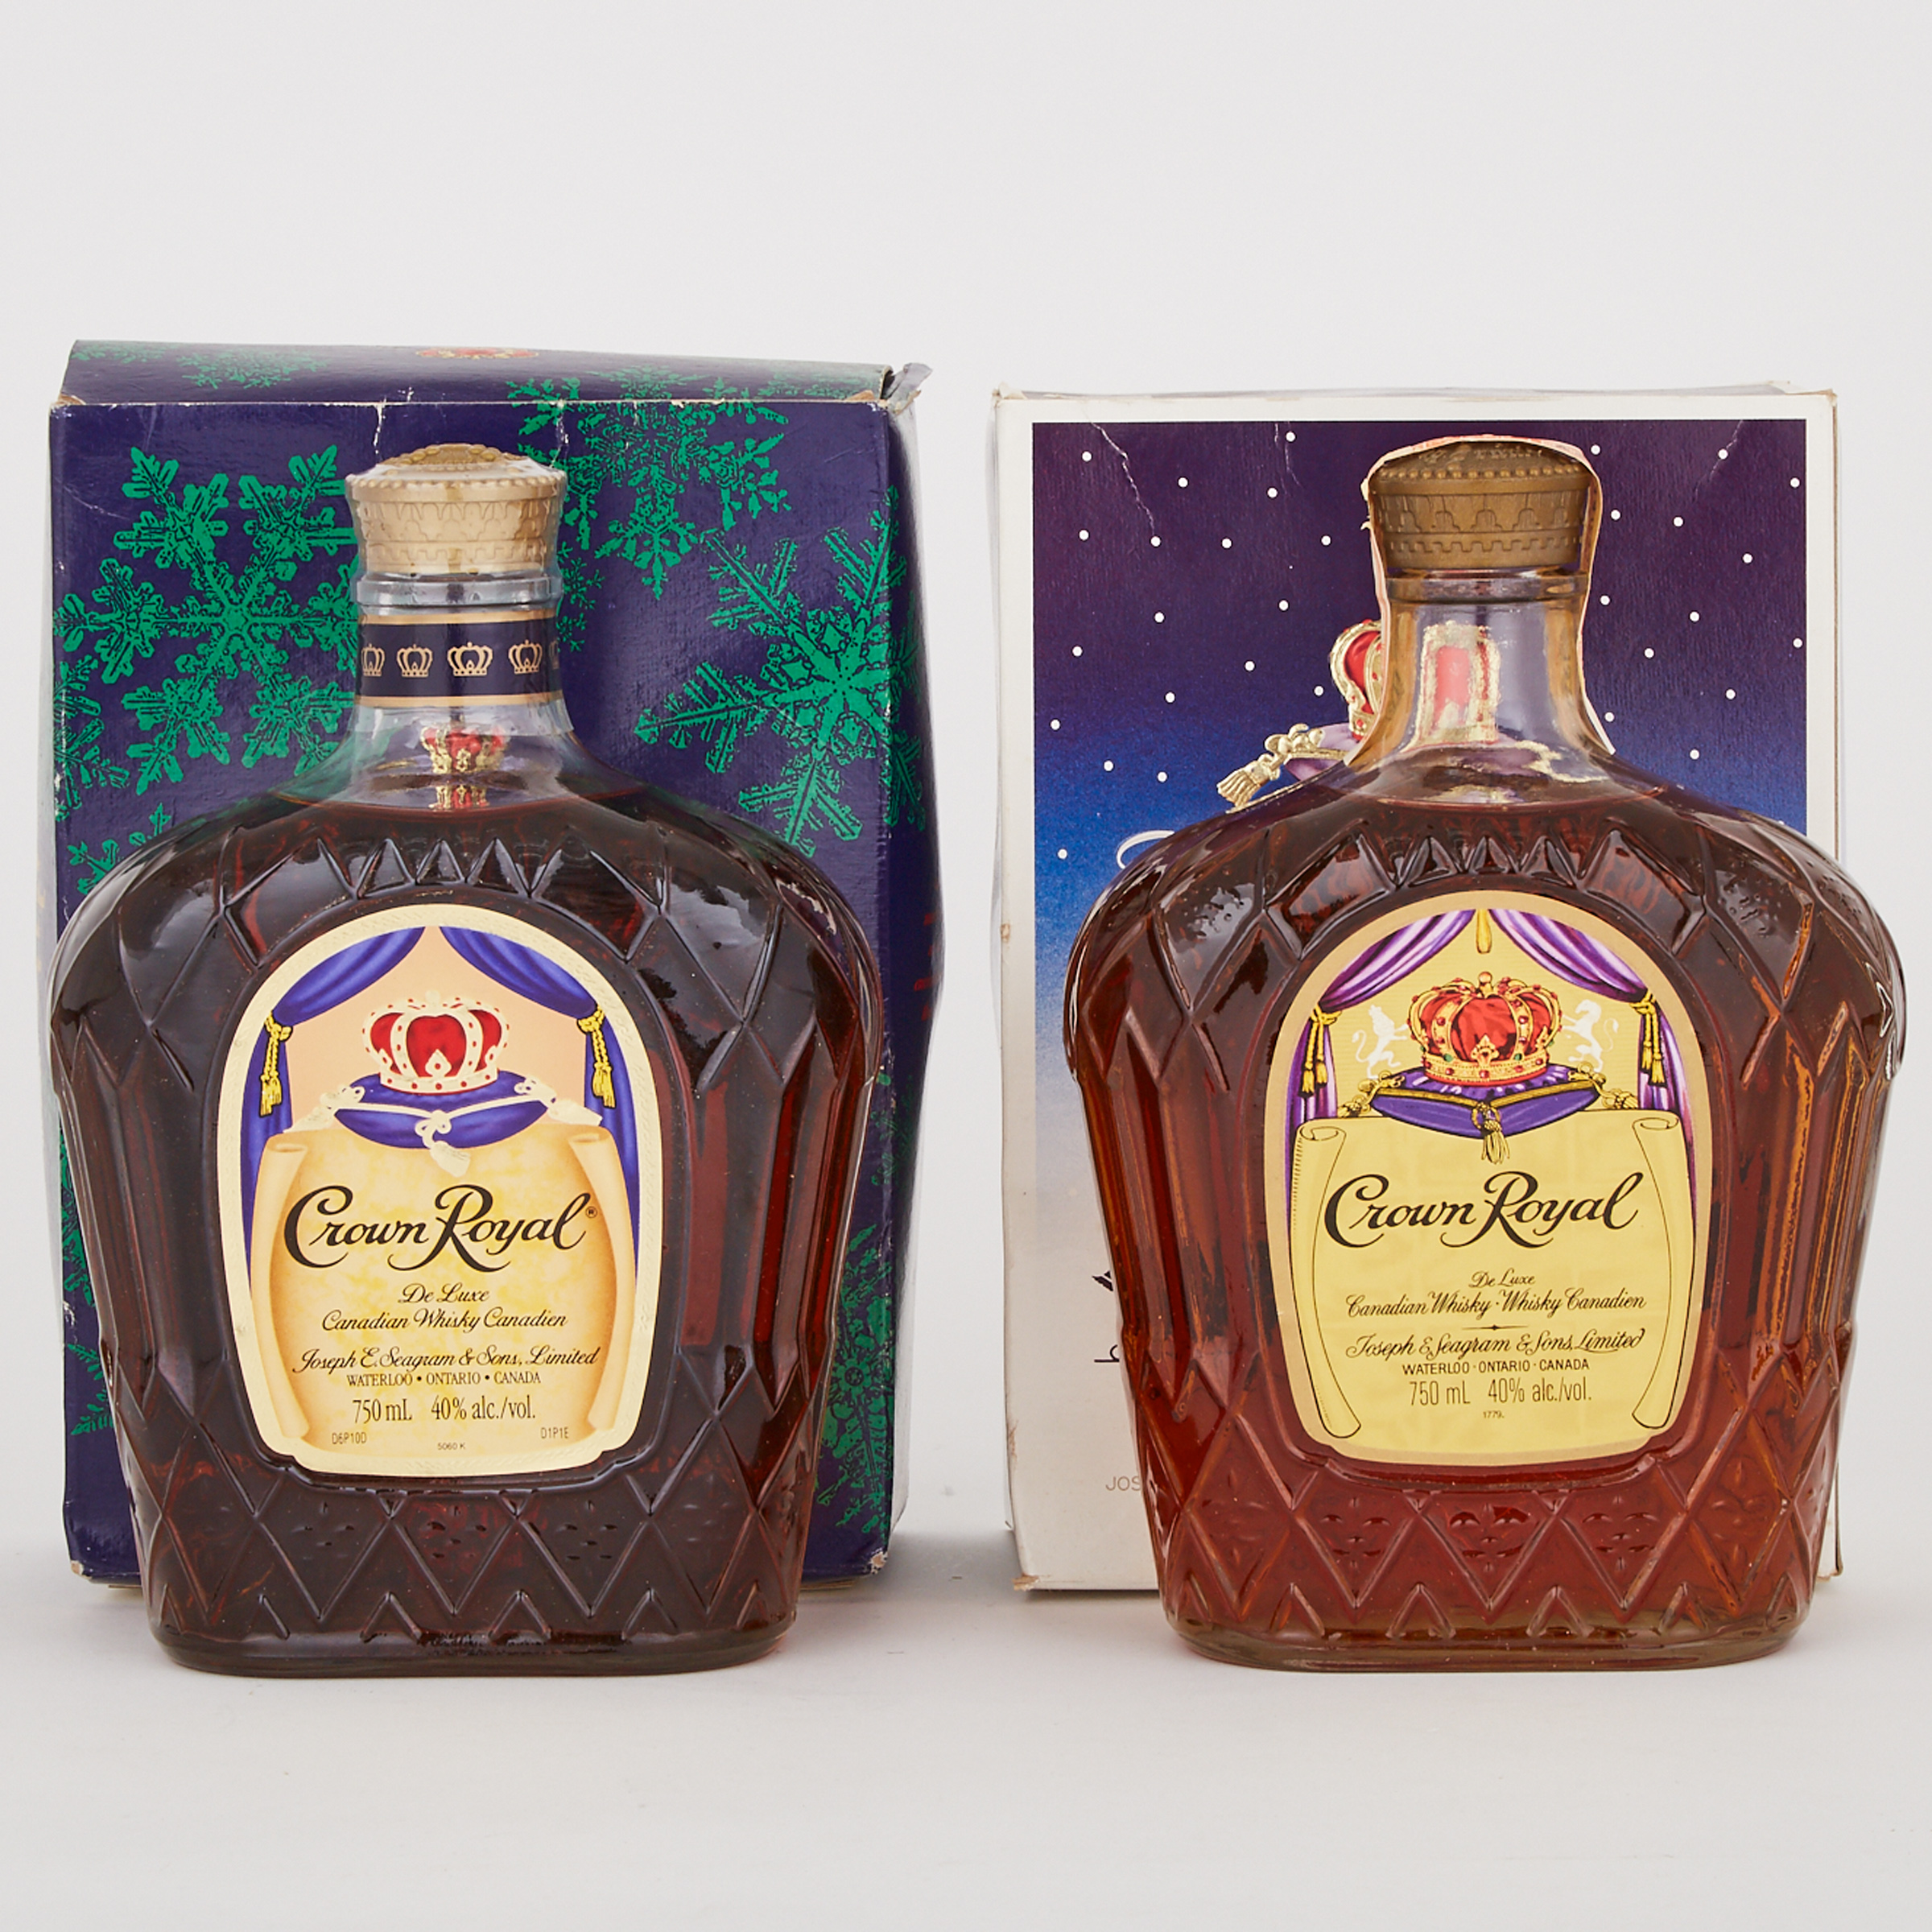 CROWN ROYAL DELUXE CANADIAN WHISKEY (ONE 750 ML)
CROWN ROYAL DELUXE CANADIAN WHISKEY (ONE 750 ML)